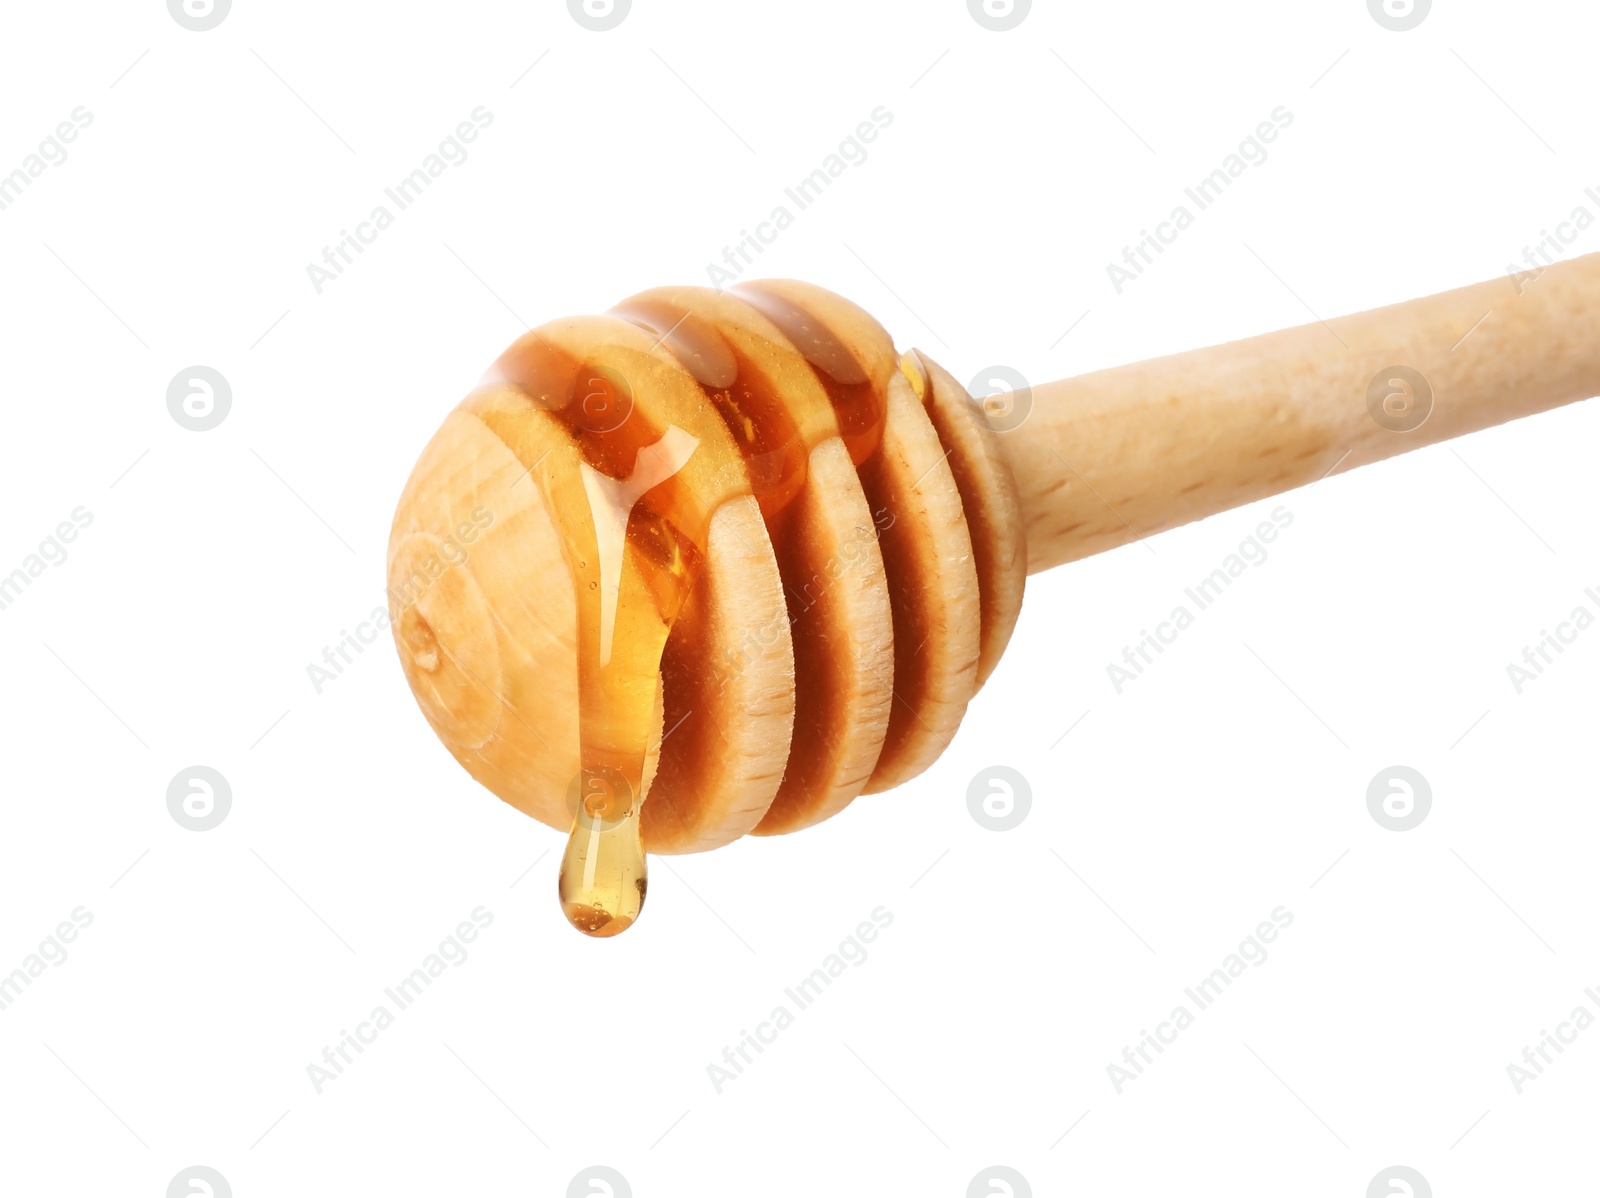 Photo of Honey dripping from dipper on white background